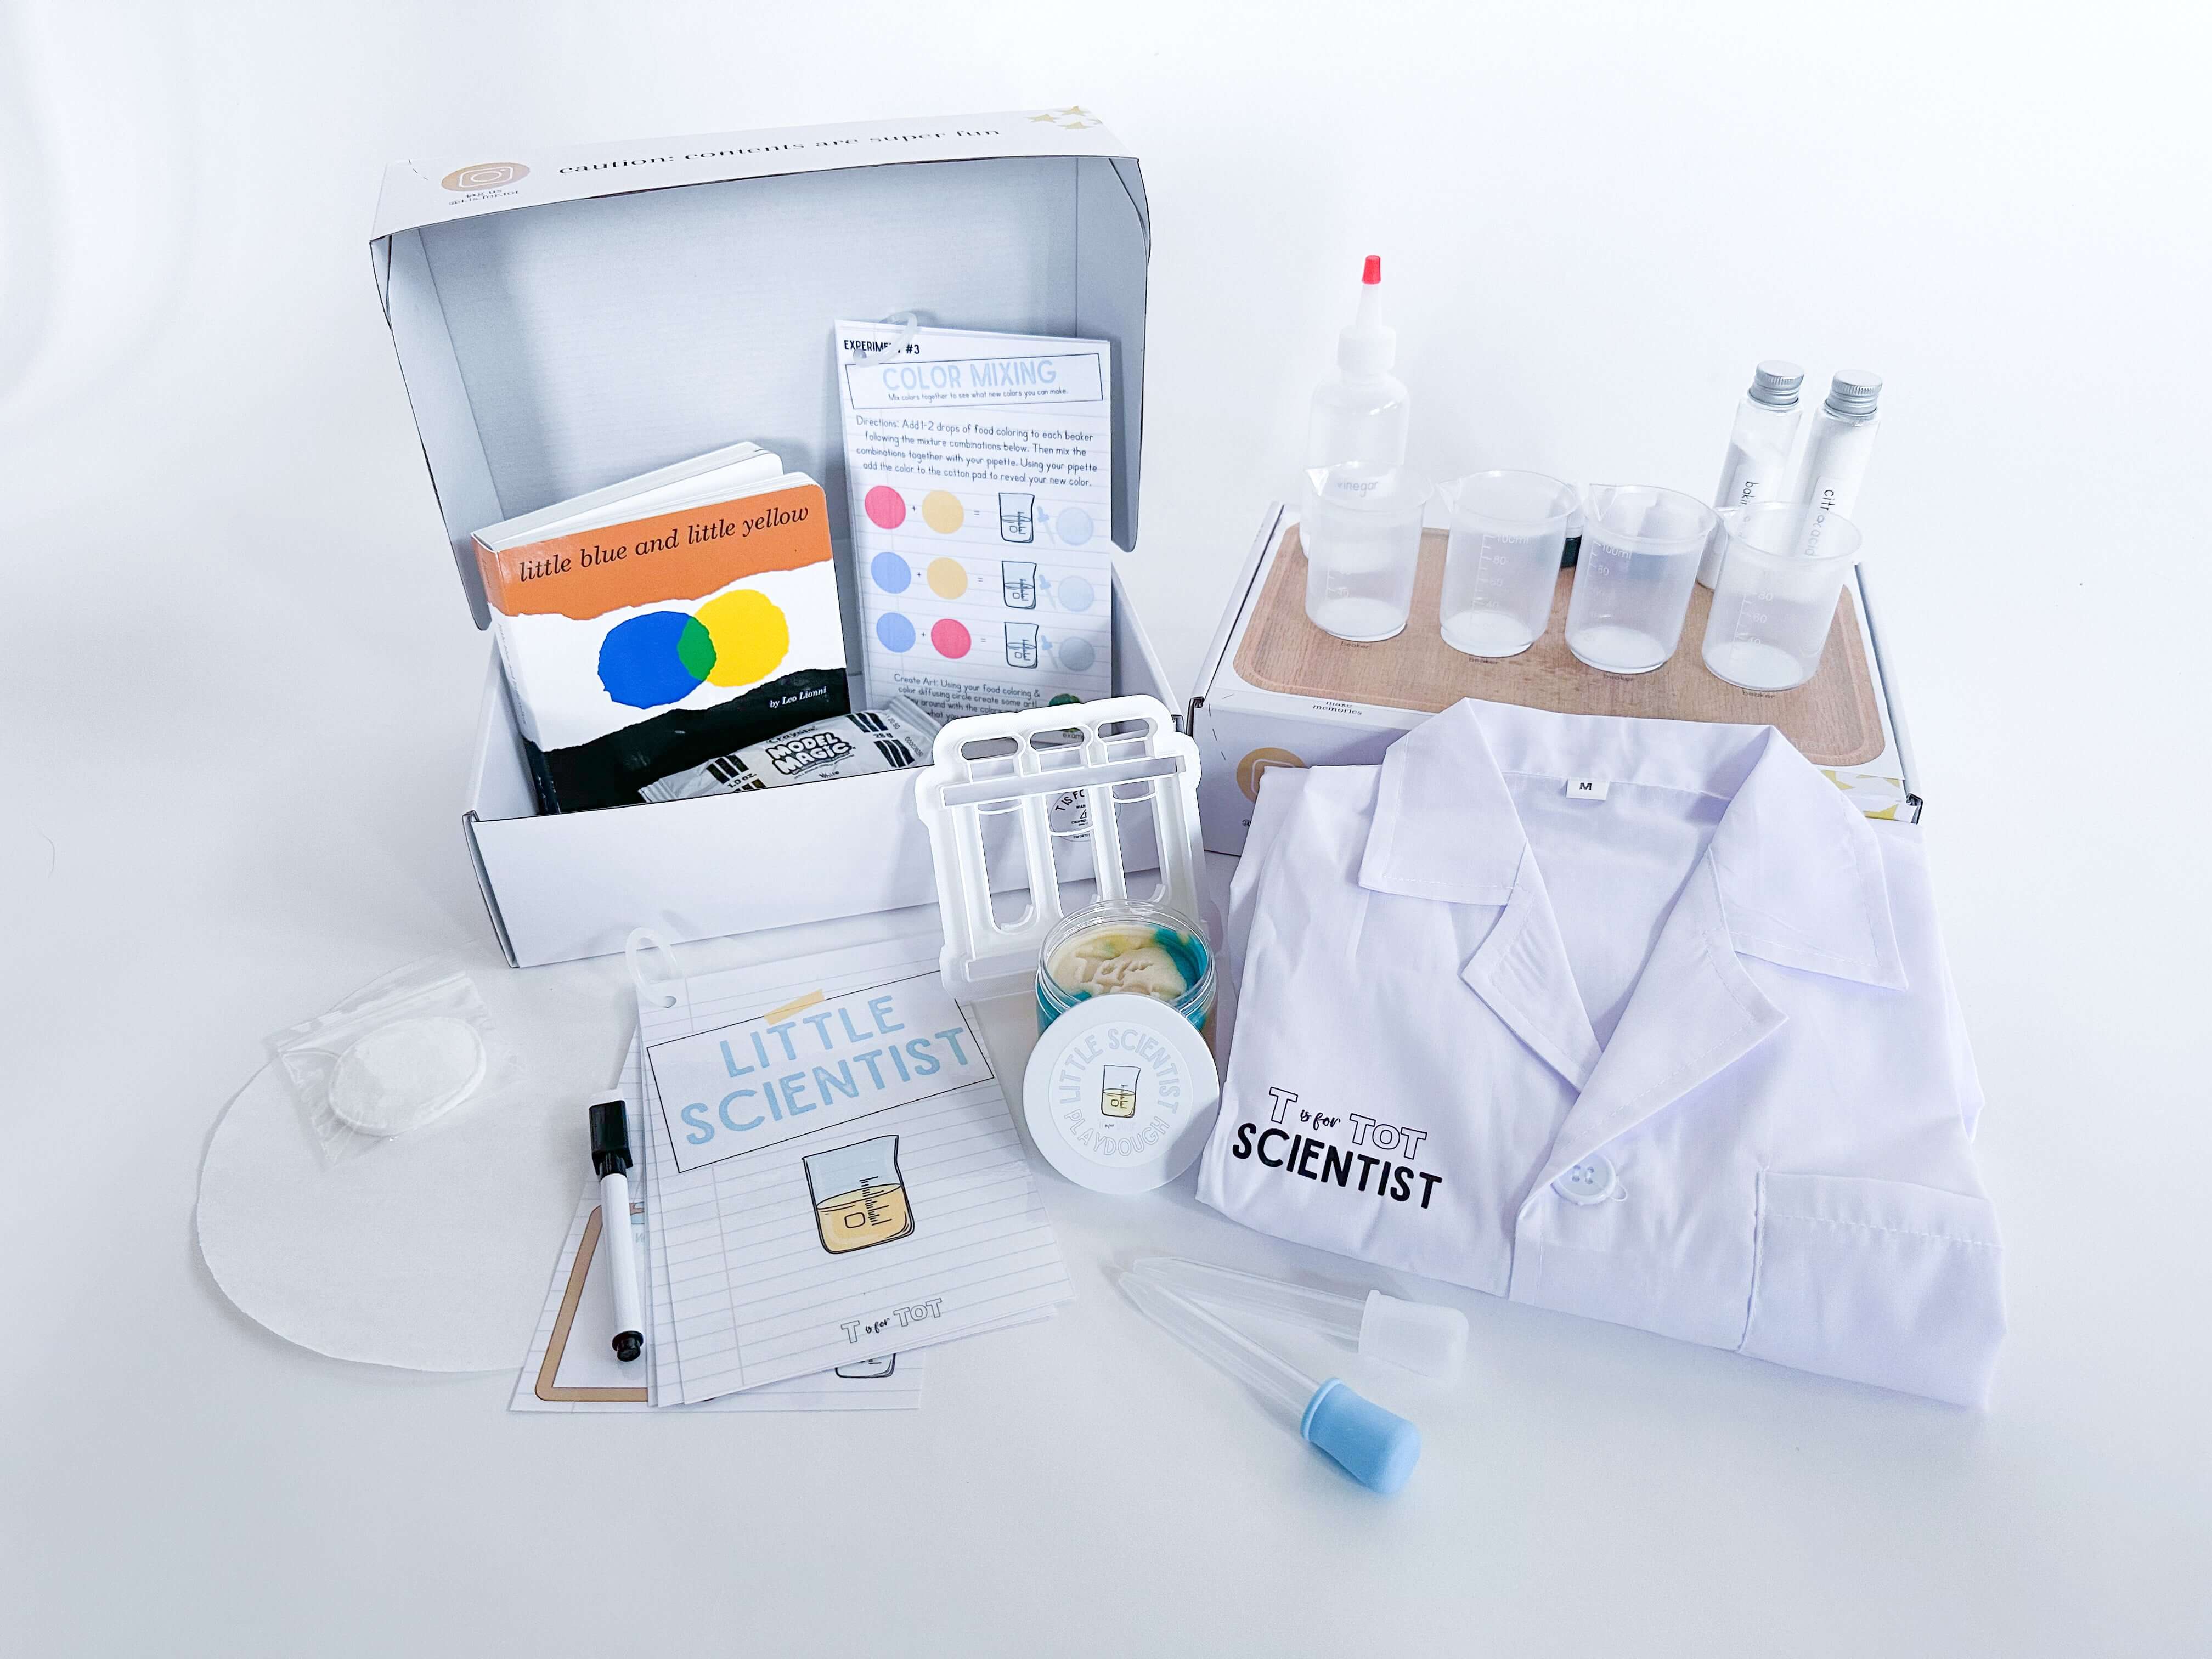 Science play kit for children with lab tools, homemade playdough, and a playdough cutter. Includes a lab coat, experiment guide, beakers, and art supplies for hands-on learning and fun experiments. Great for young aspiring scientists.